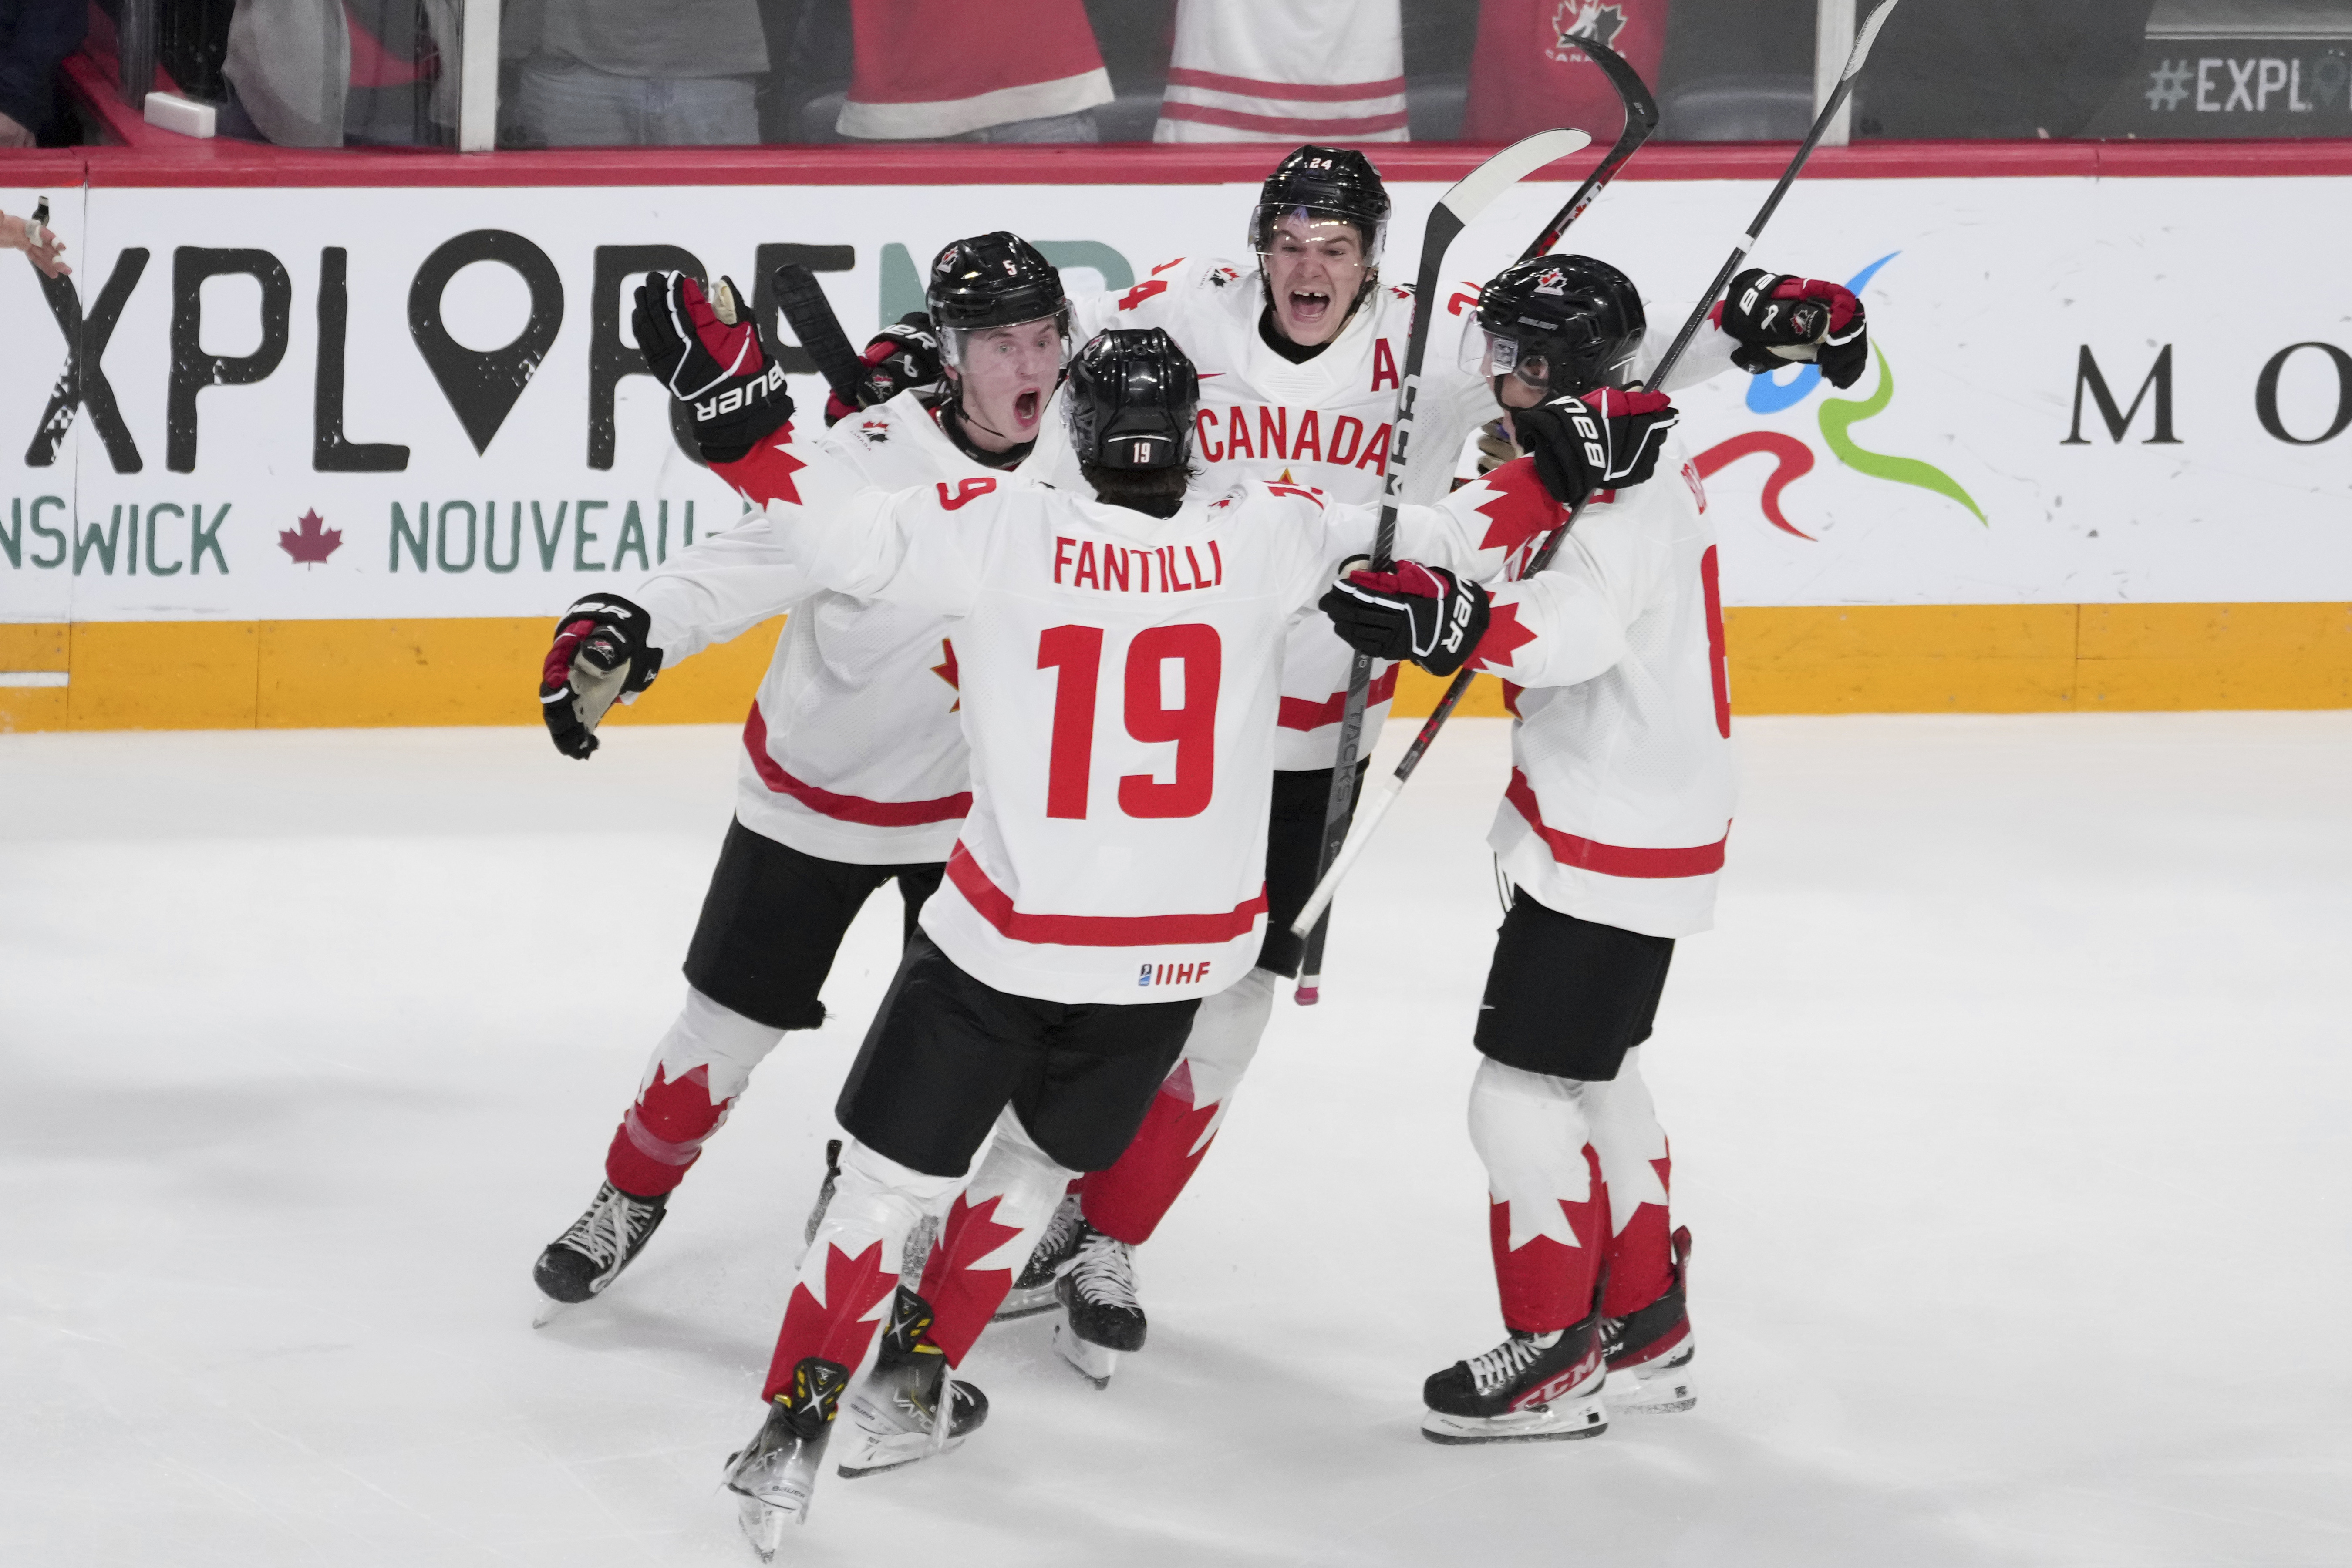 world juniors gold medal game live stream free